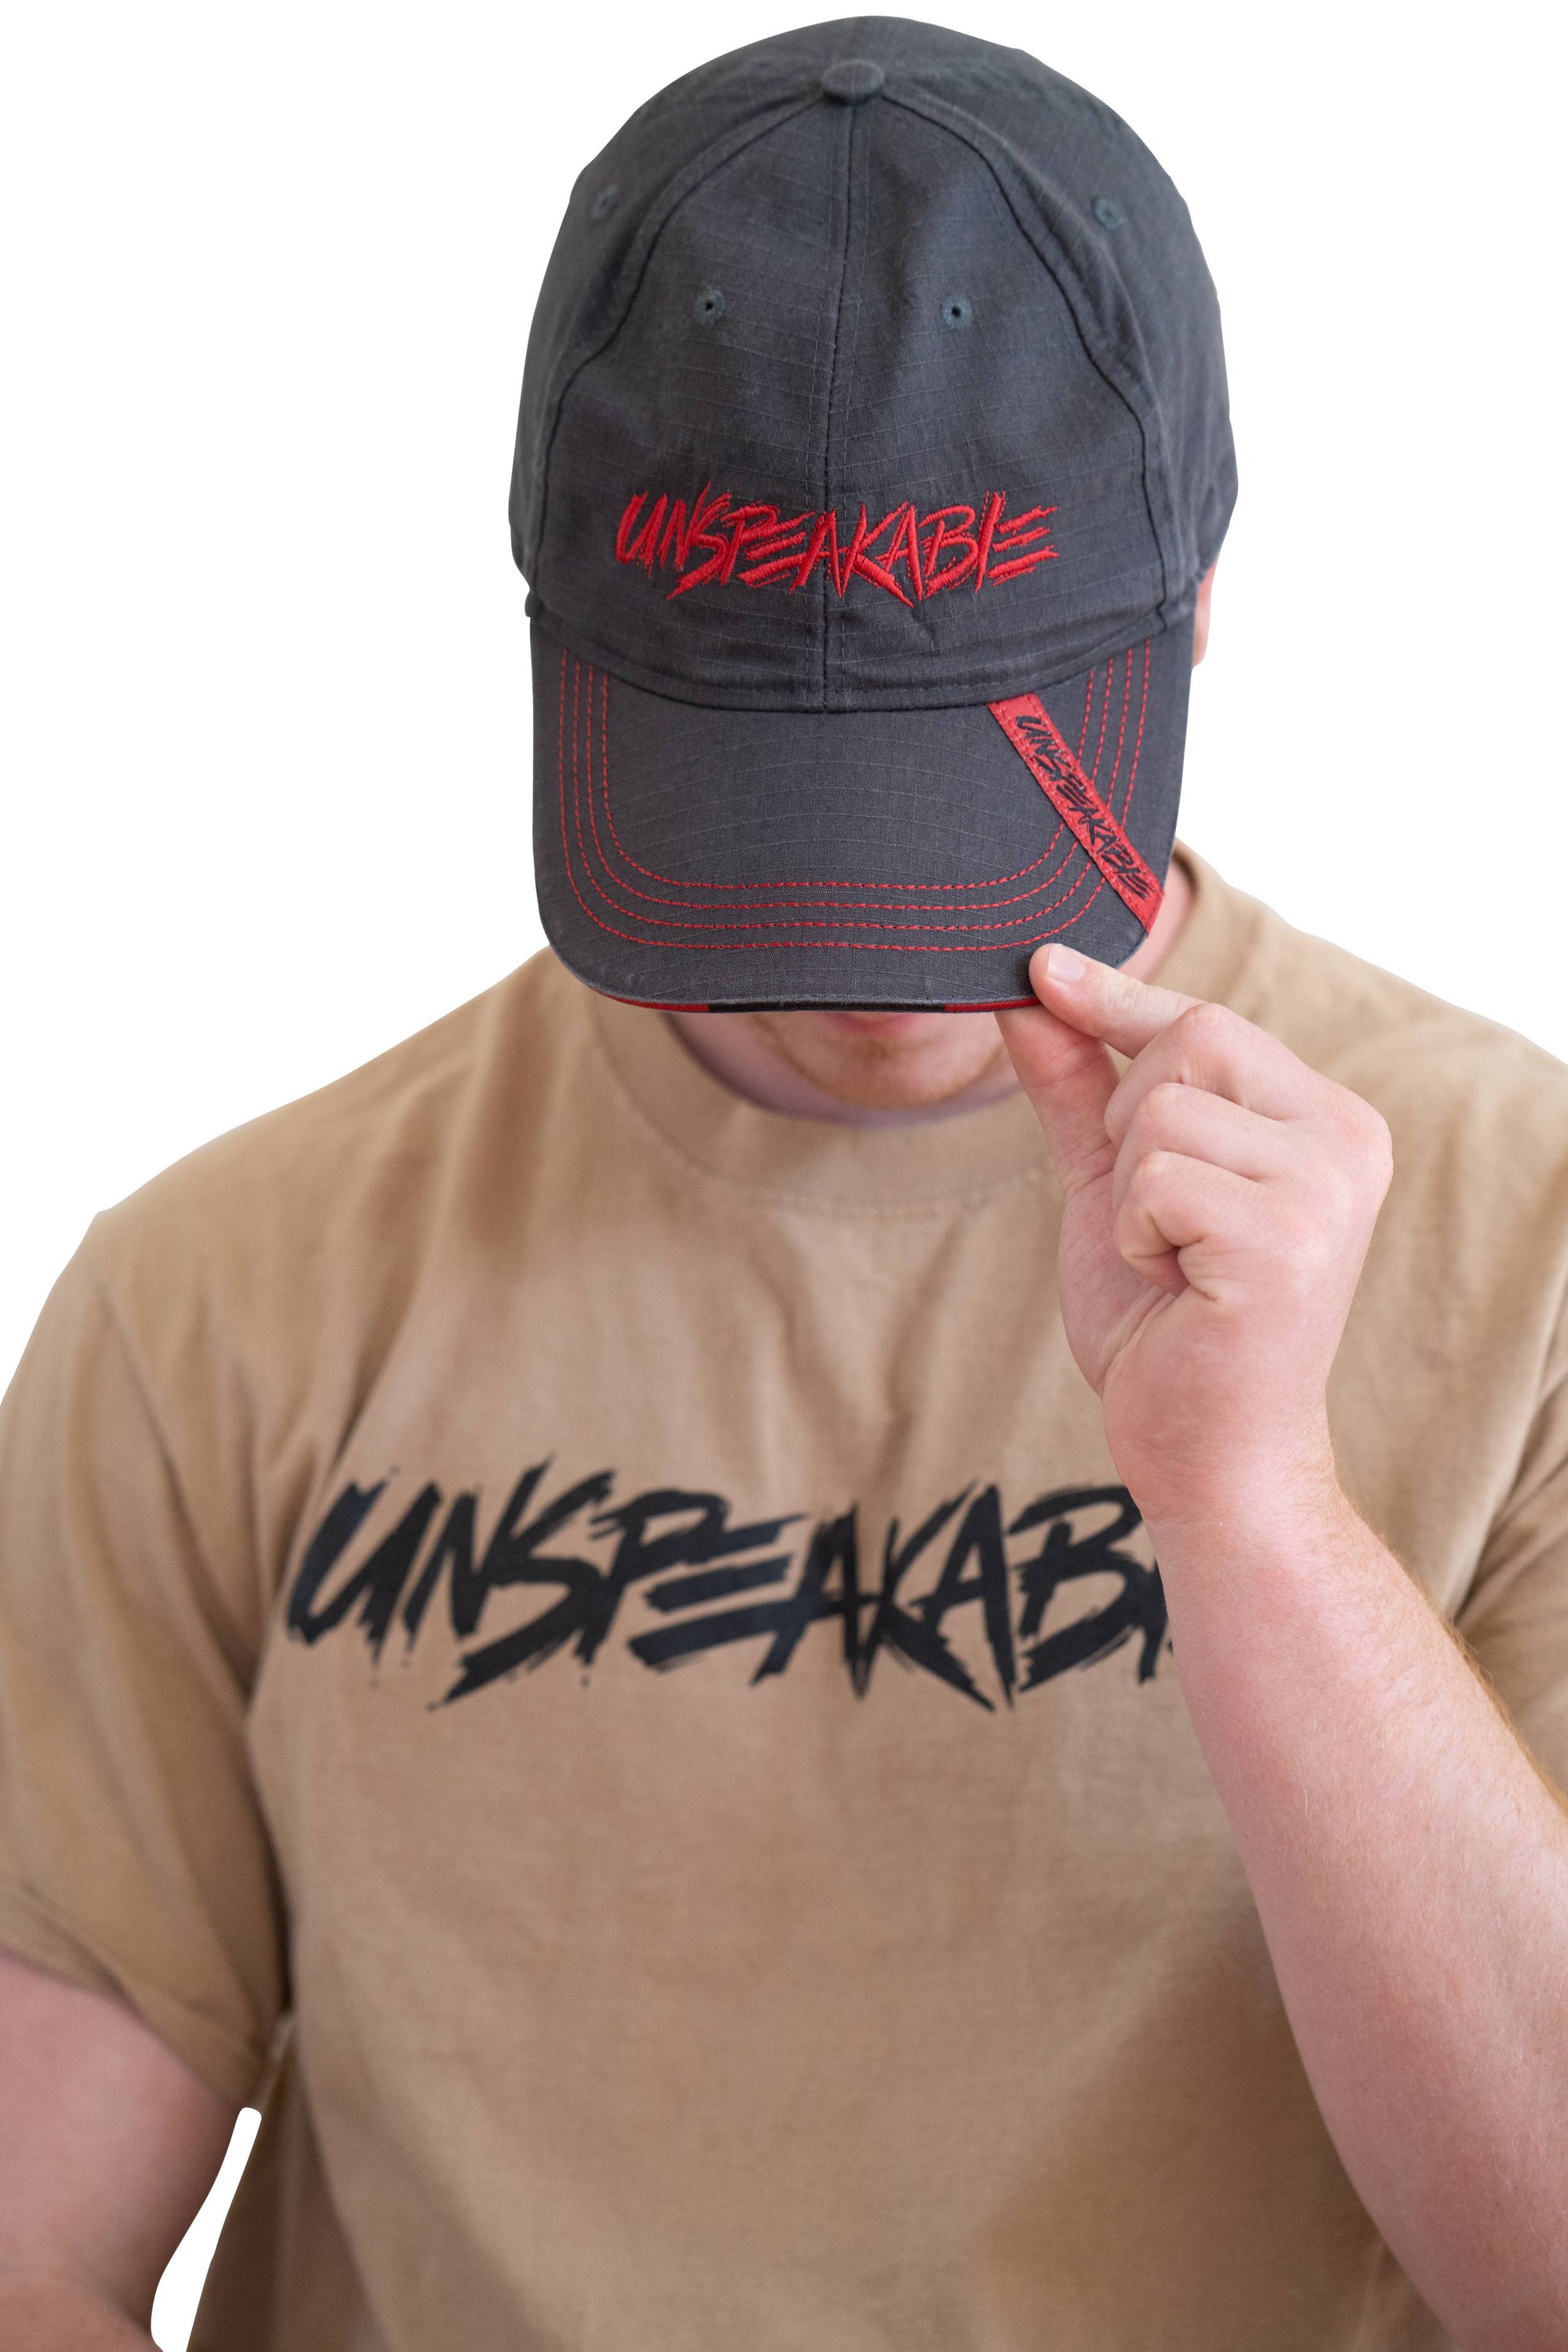 GREY CUSTOM HAT W/RED FONT & RED STITCHING - UnspeakableGaming